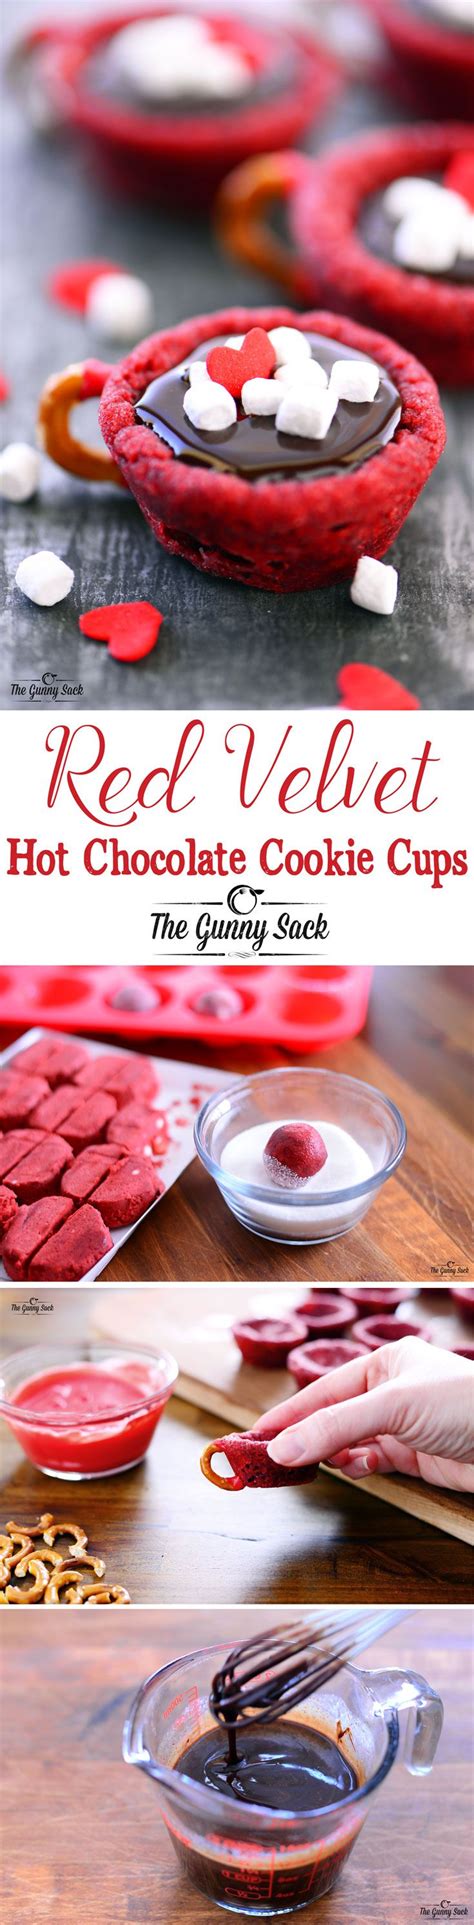 Red Velvet Hot Chocolate Cookie Cups The Gunny Sack Hot Chocolate